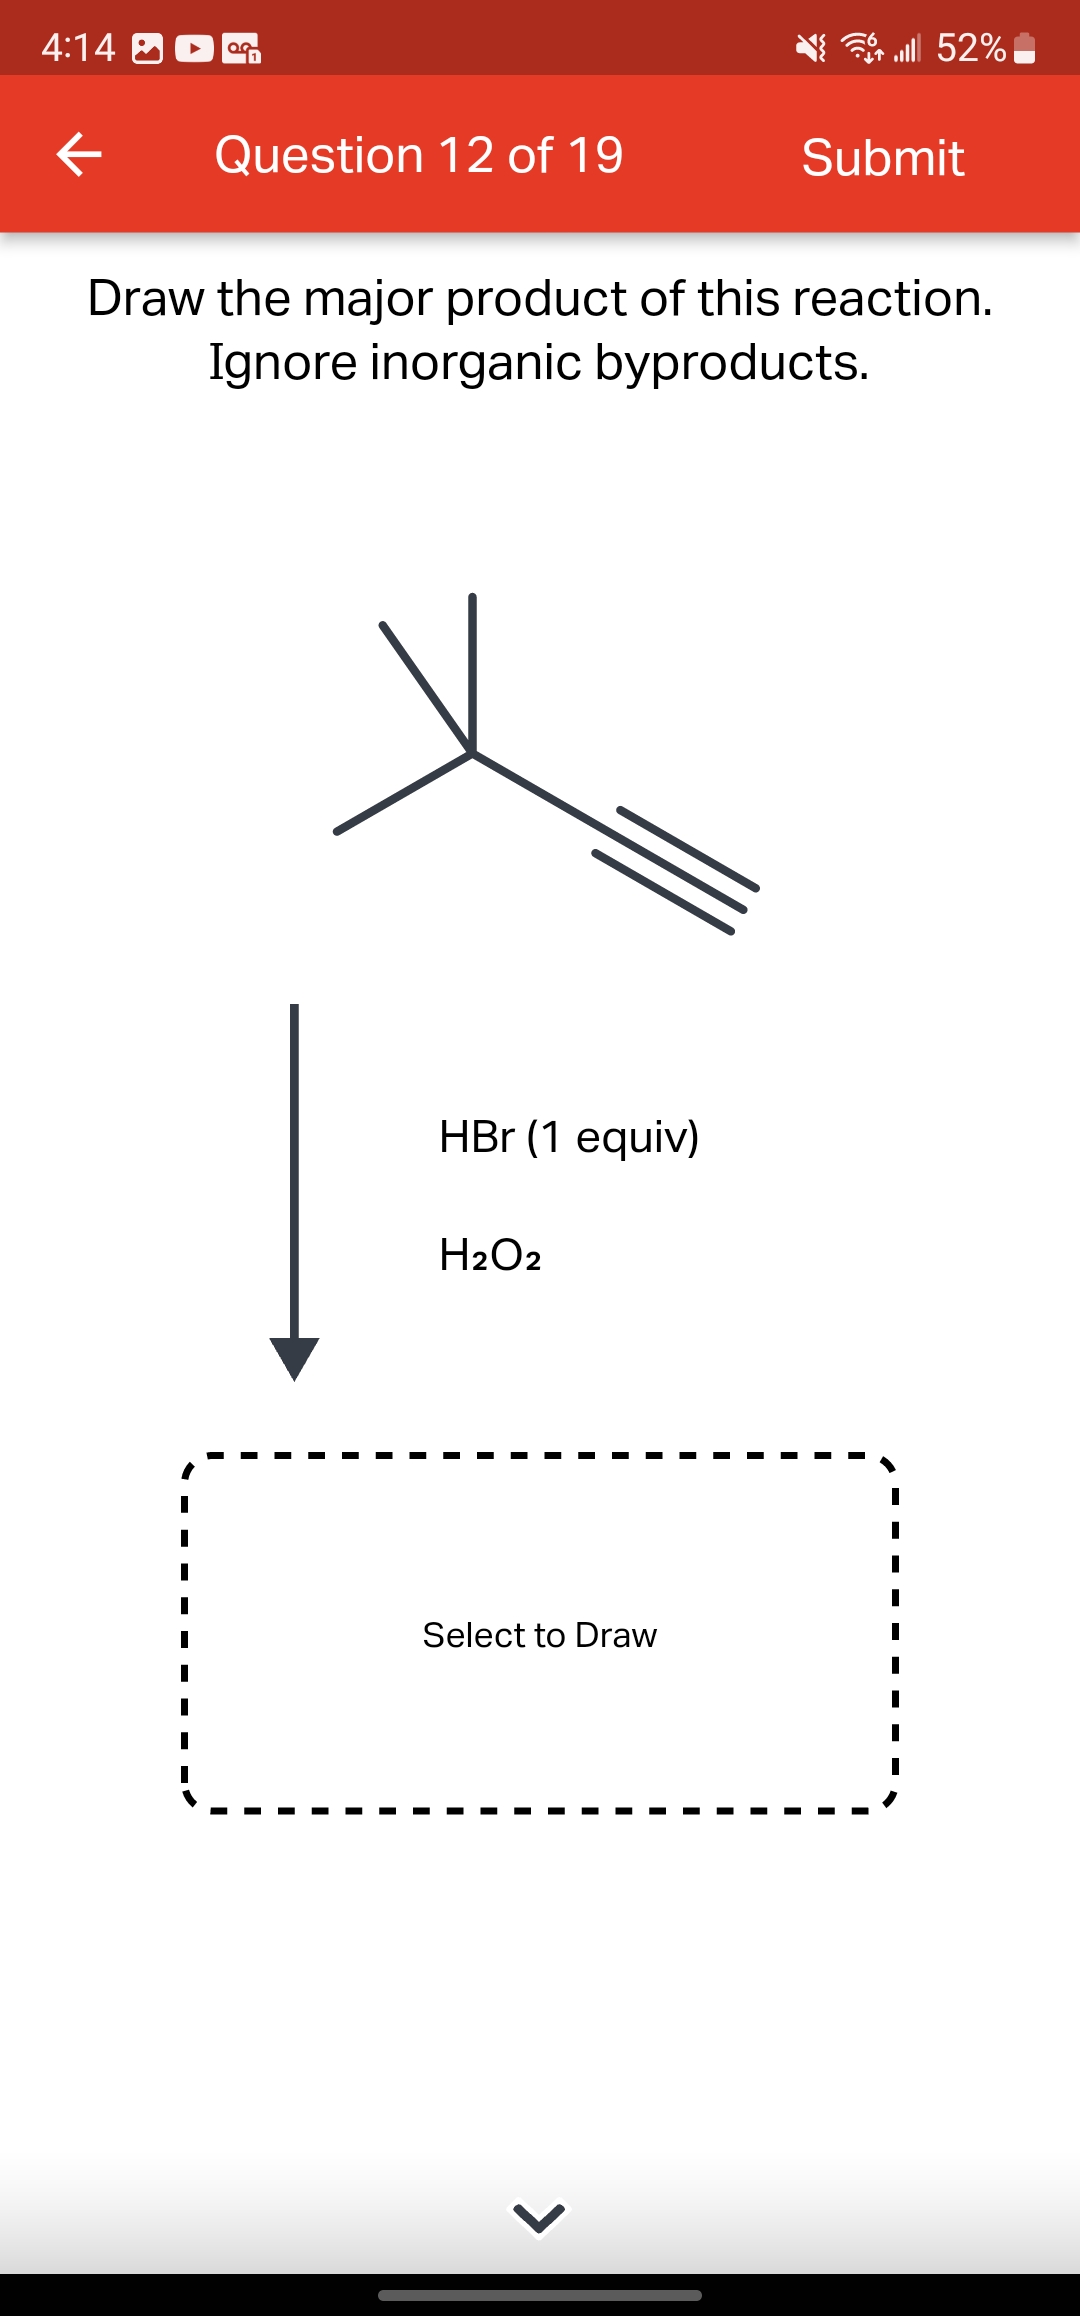 4:14
←
OG
Question 12 of 19
HBr (1 equiv)
Draw the major product of this reaction.
Ignore inorganic byproducts.
H₂O2
Select to Draw
lll 52%
>
Submit